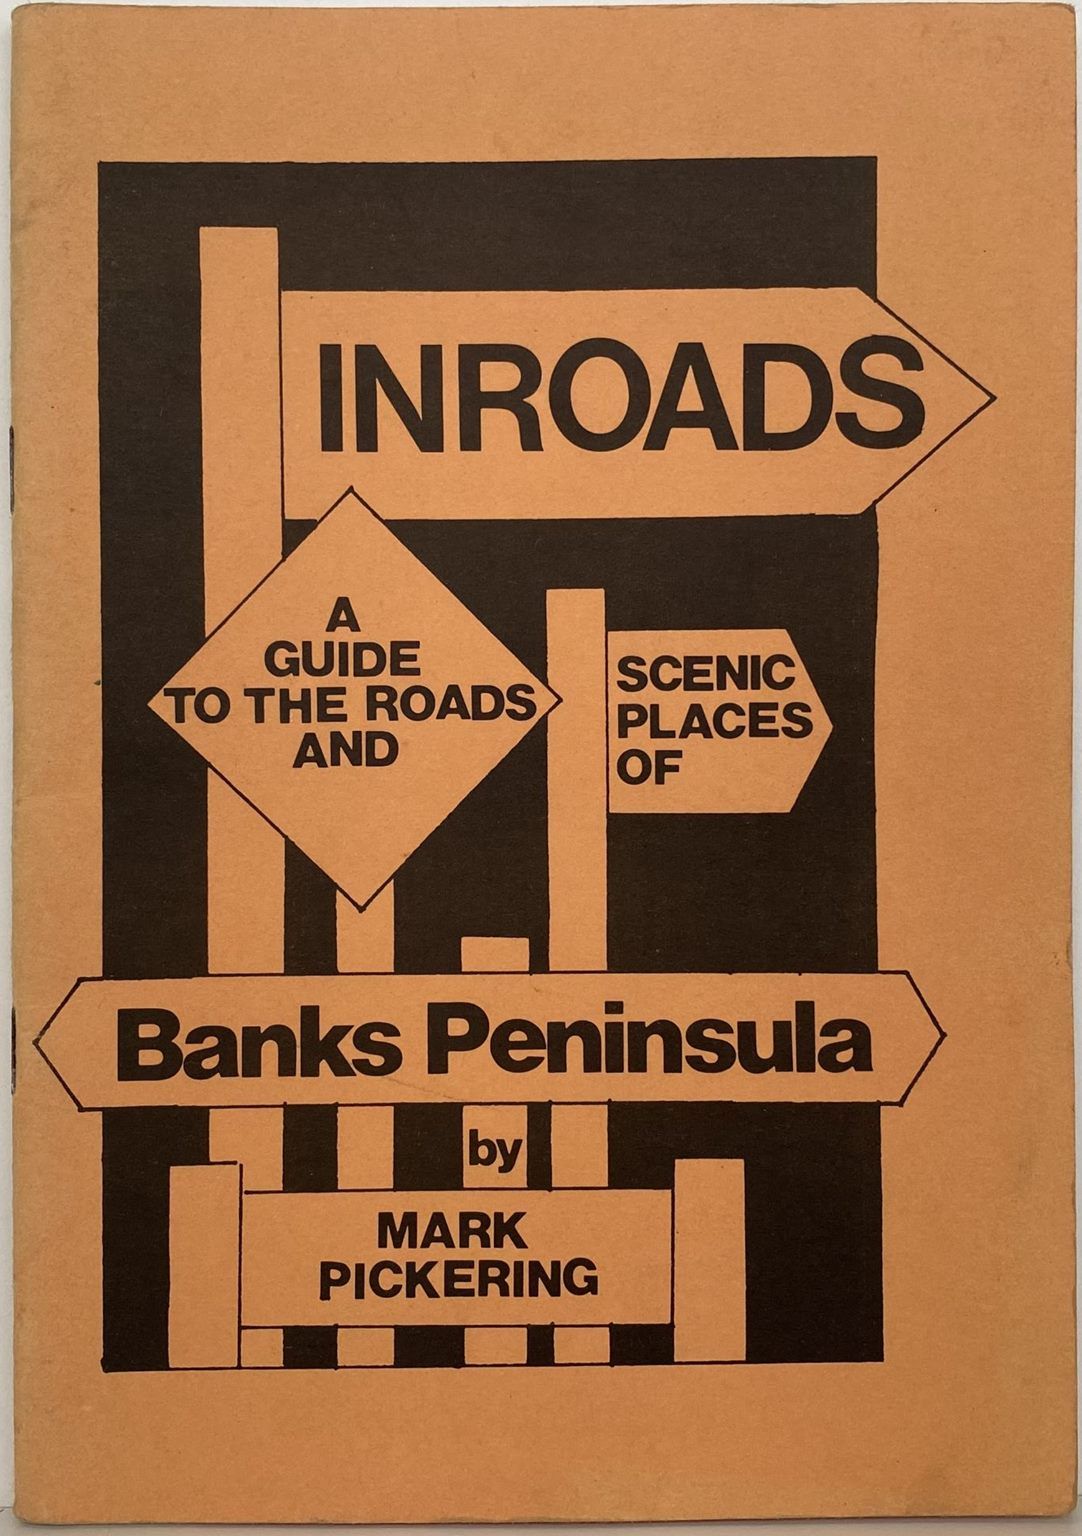 INROADS: A Guide to the Roads and Scenic places of Banks Peninsula